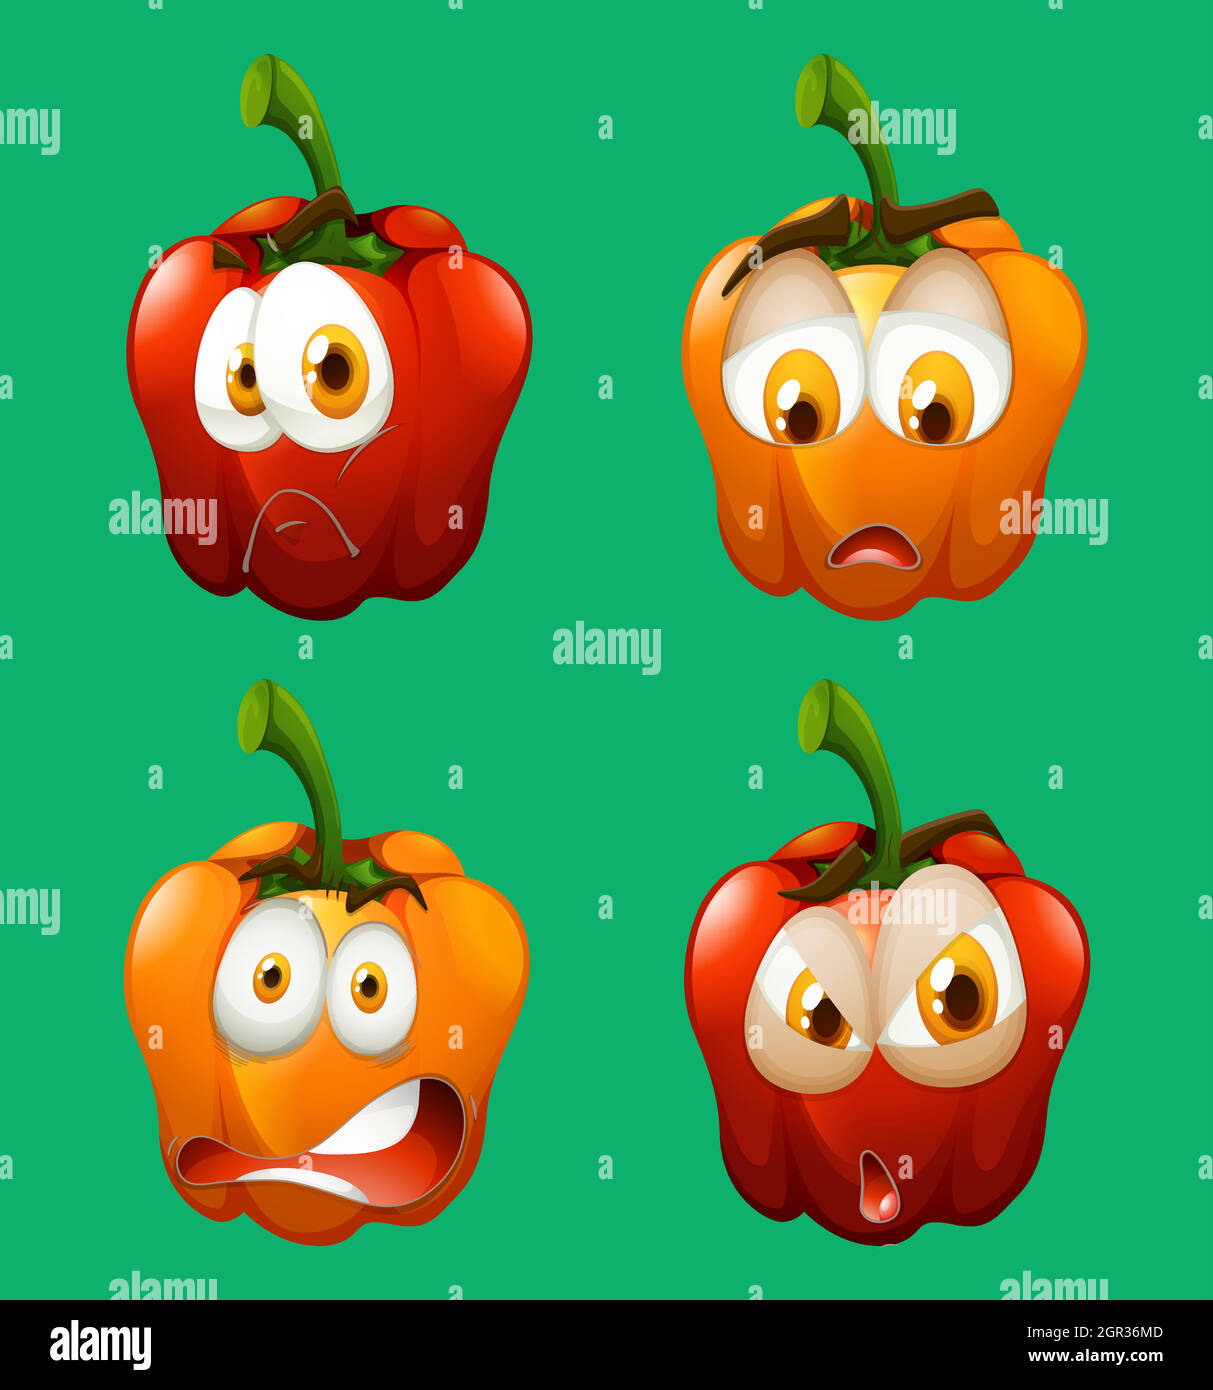 Facial expression on bell pepper Stock Vector